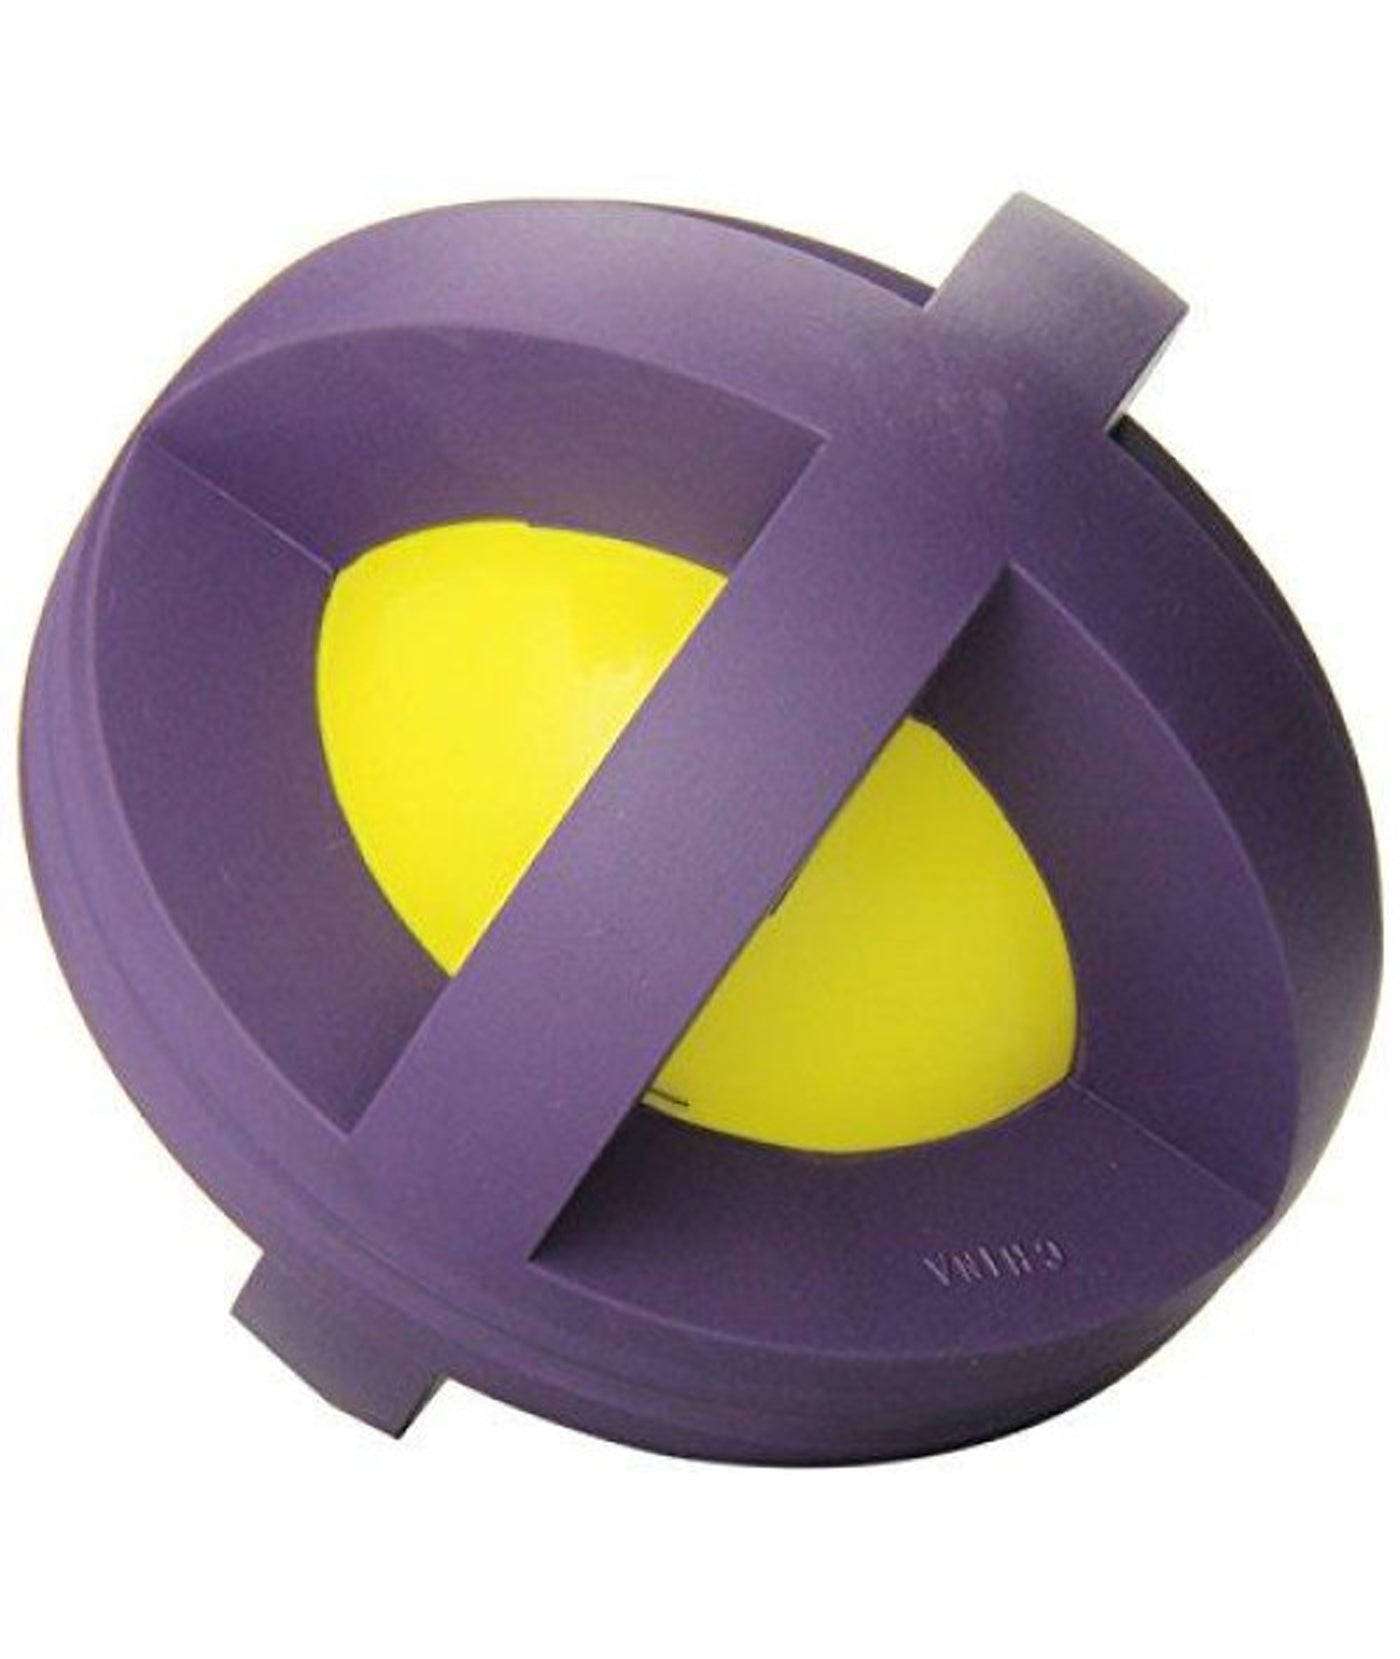 Multipet Boingo Ball (Assorted Colors) 5 Inch